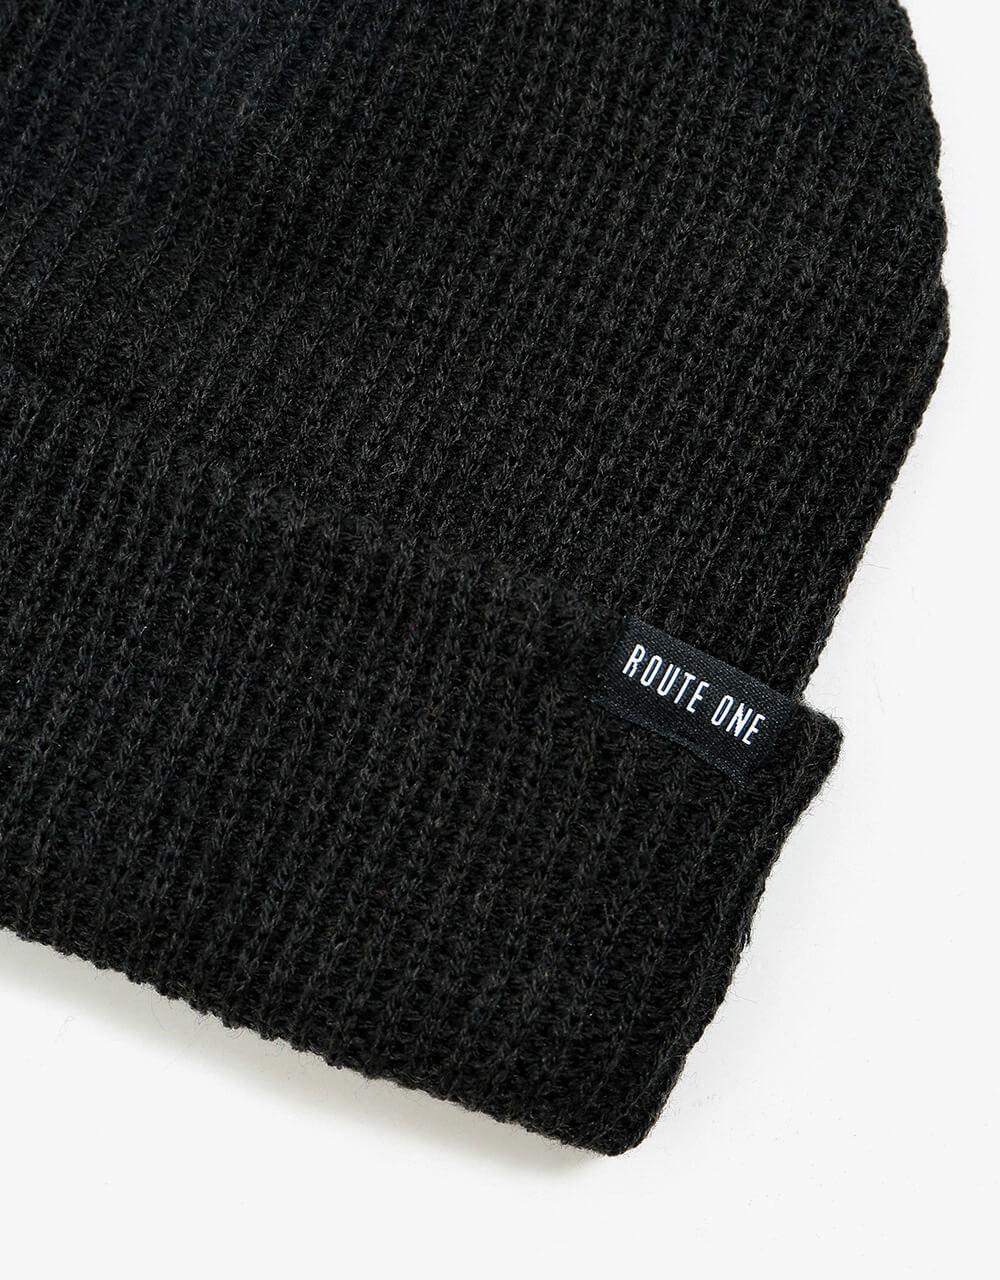 Route One Recycled Fisherman Beanie - Black